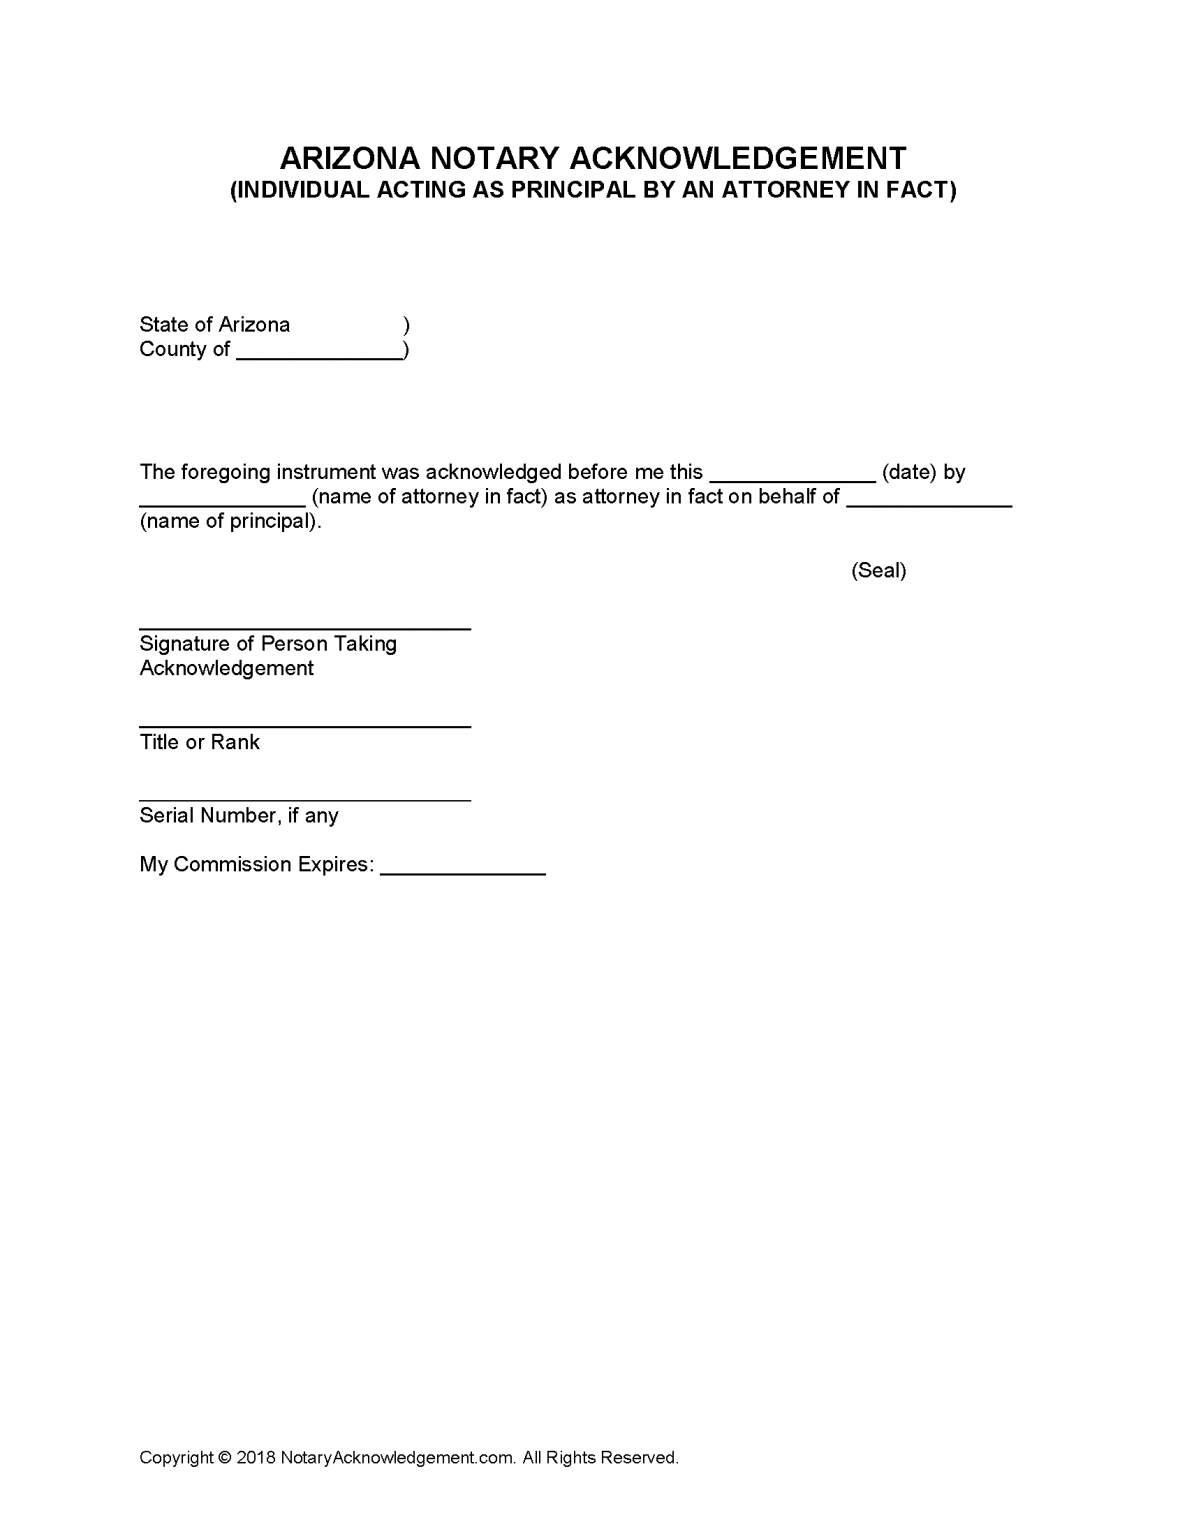 free-arizona-notary-acknowledgement-forms-pdf-word